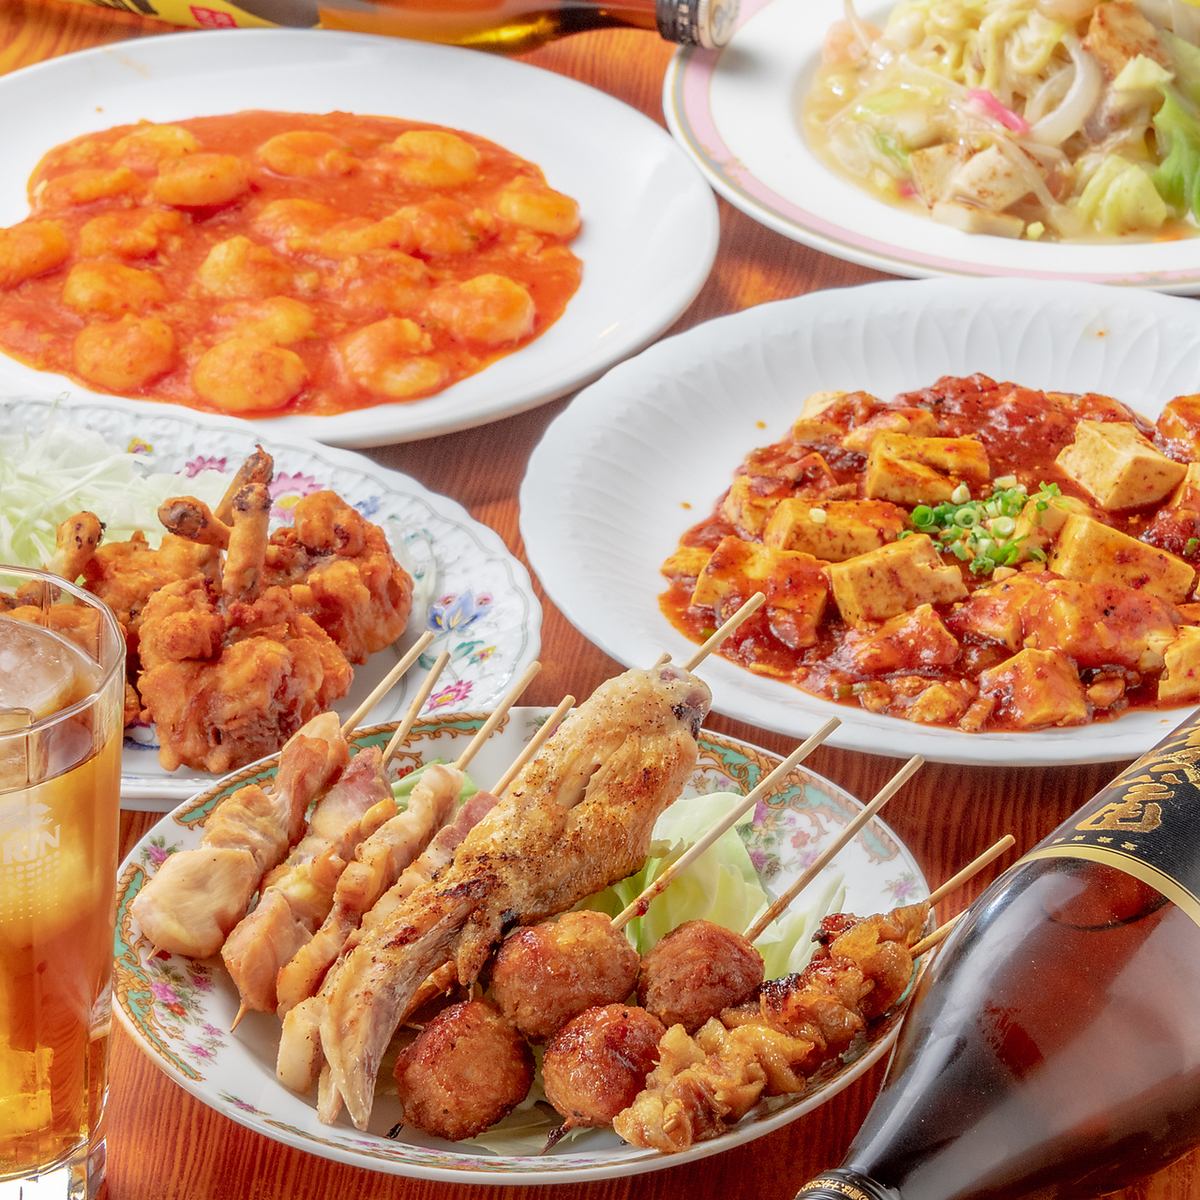 Enjoy Chinese food with spices ★